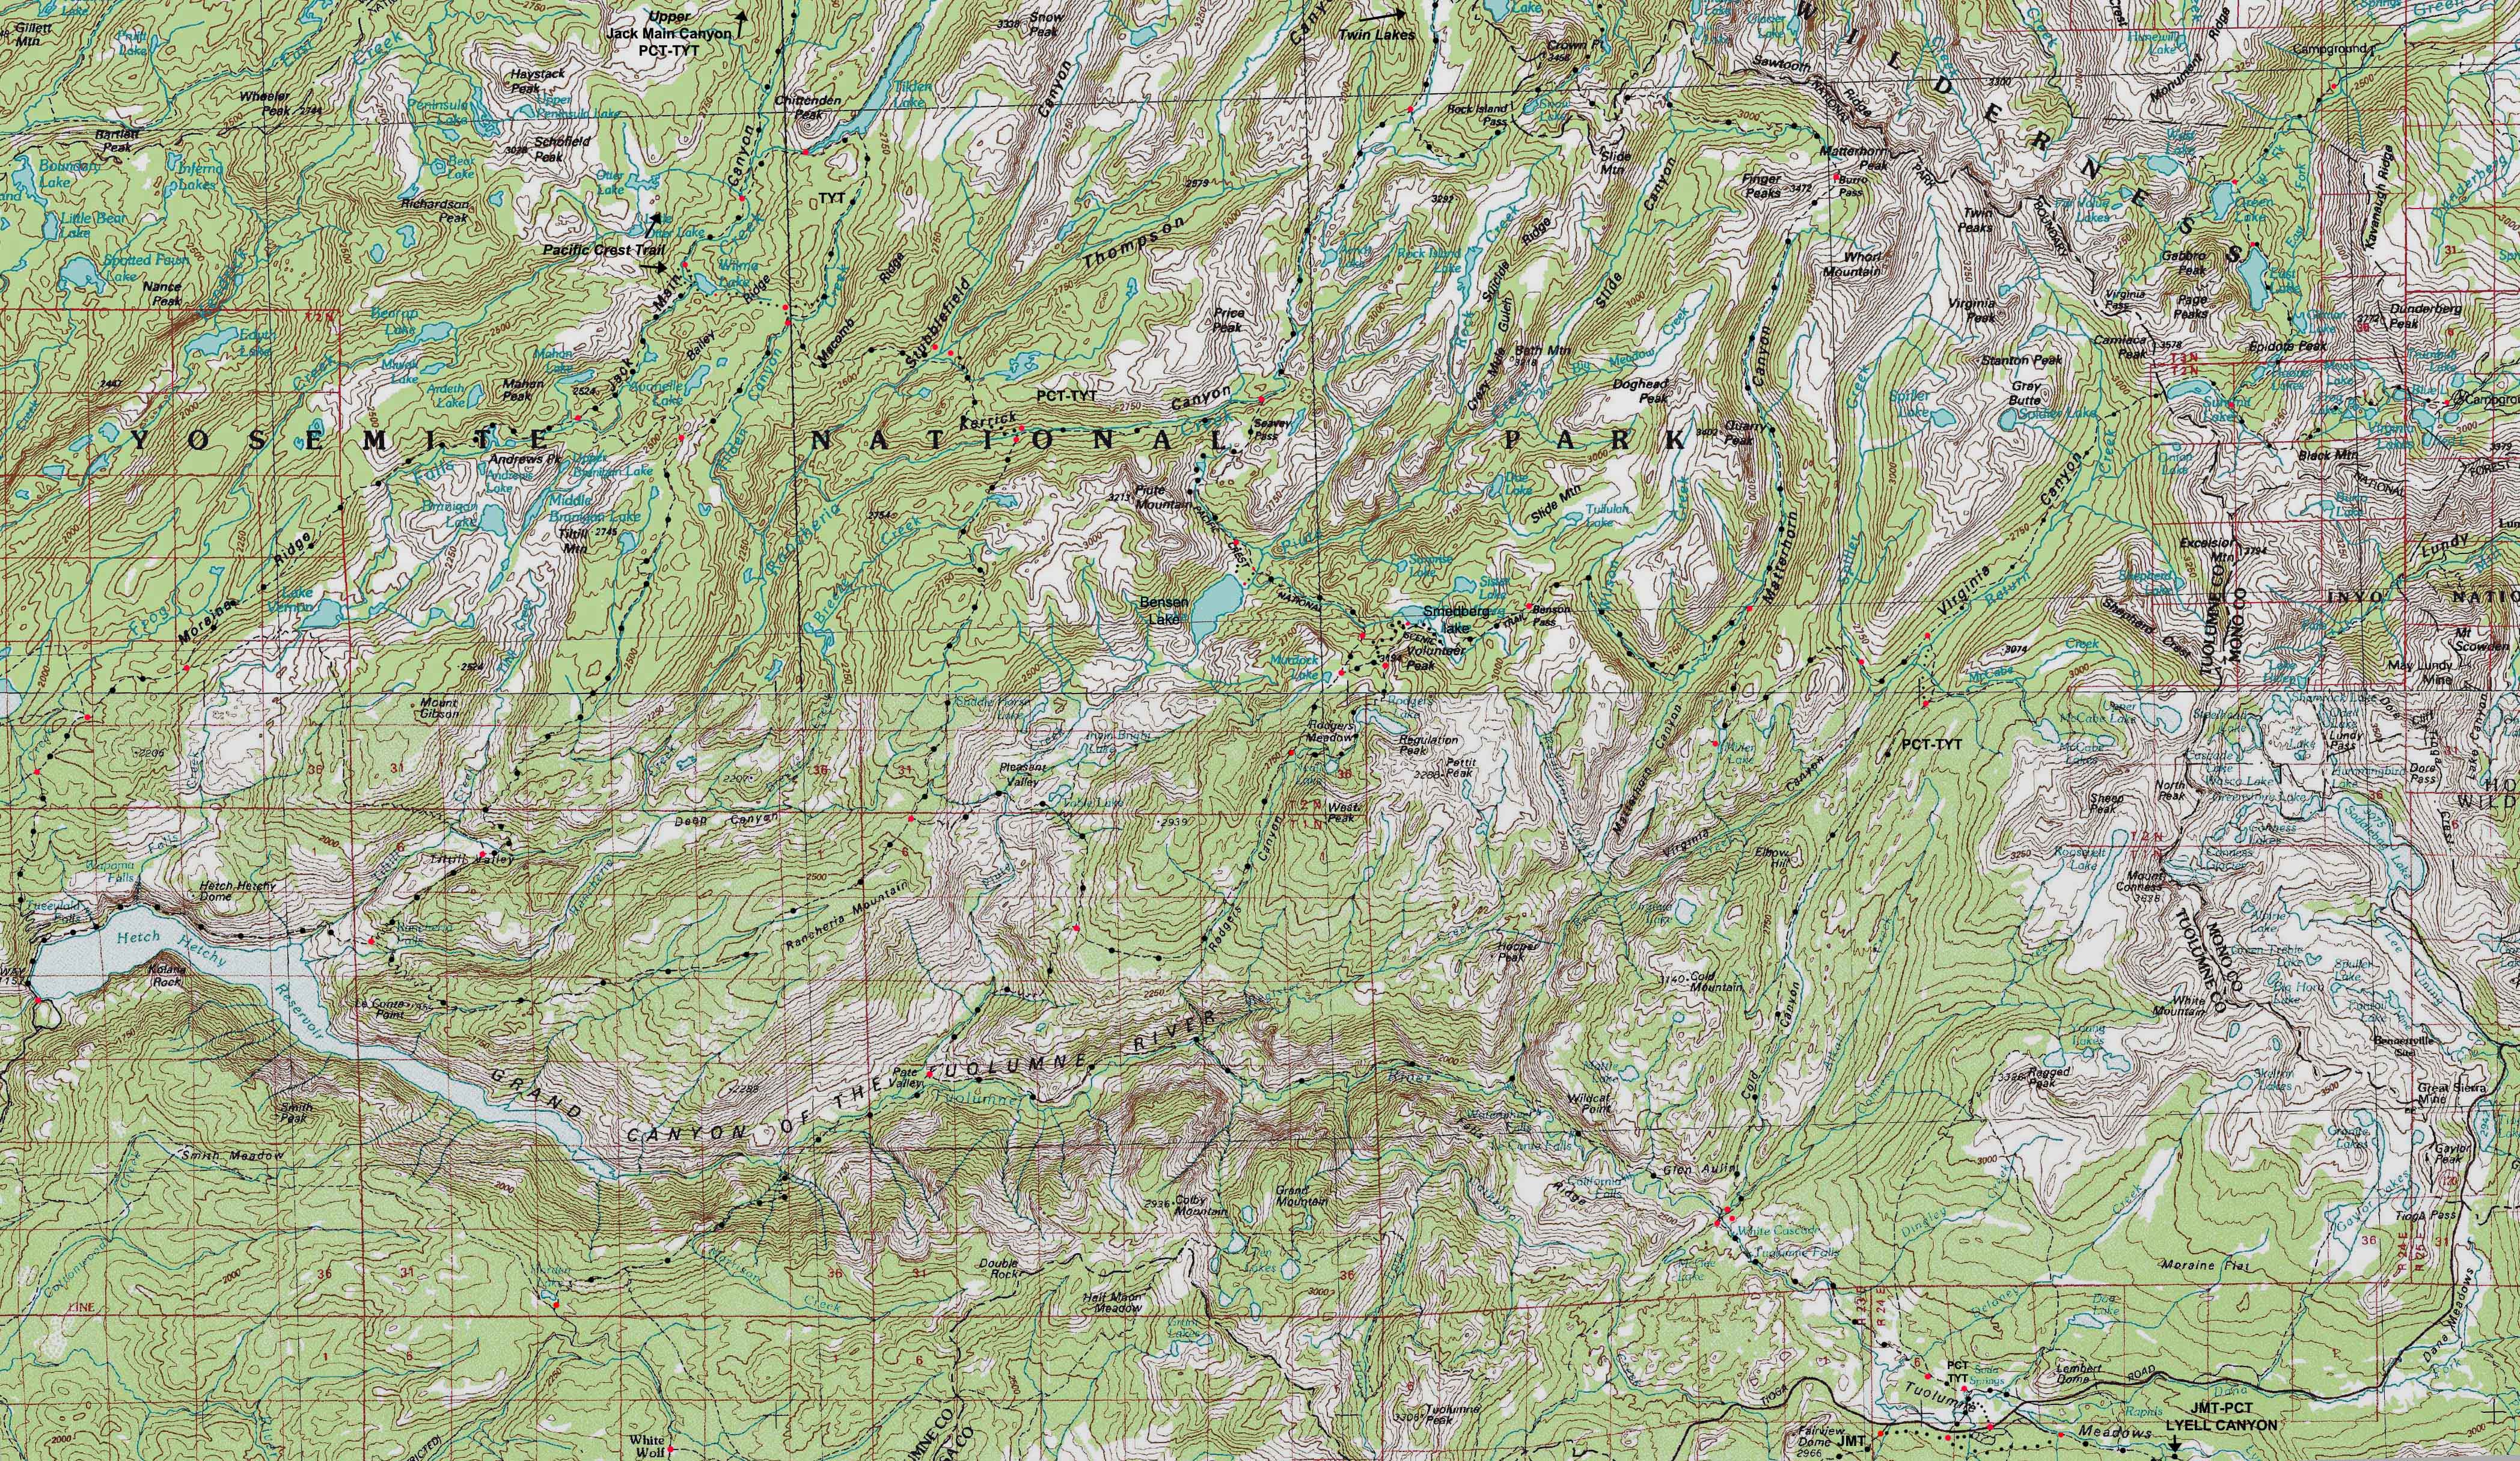 Backpacking map of the Grand Canyon of the Tuolumne River.